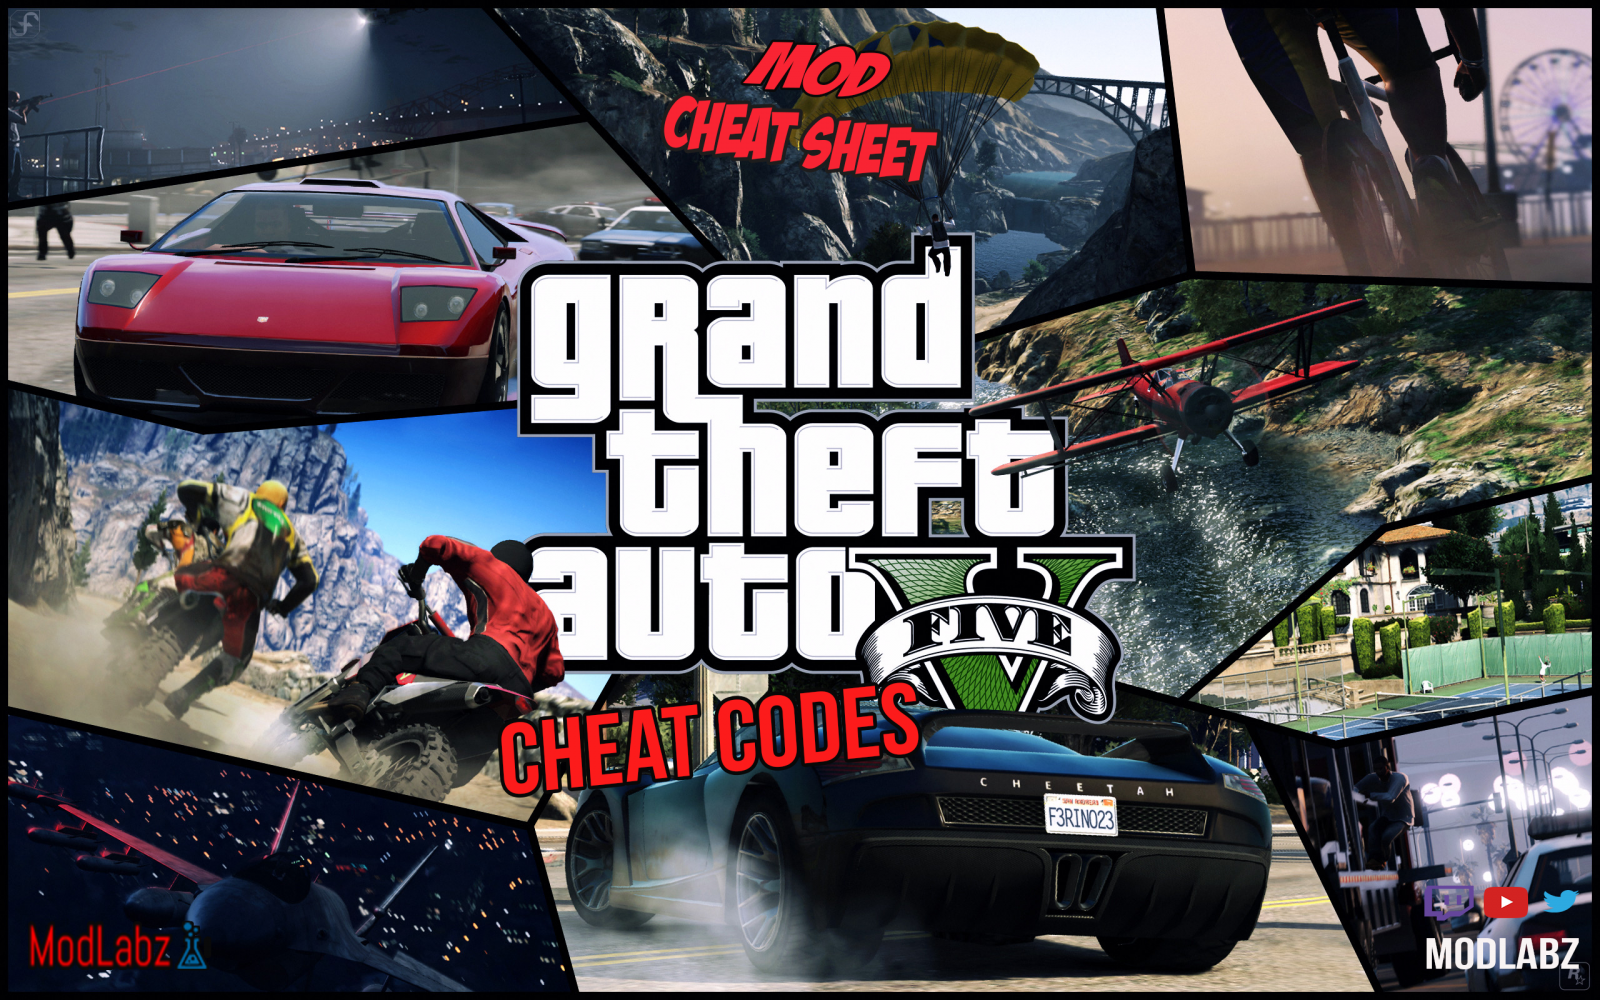 Gta 5 Cheat Codes Invincibility Weapons Ammo Lower Wanted Level And So Much More Mod Cheatsheet Modlabz